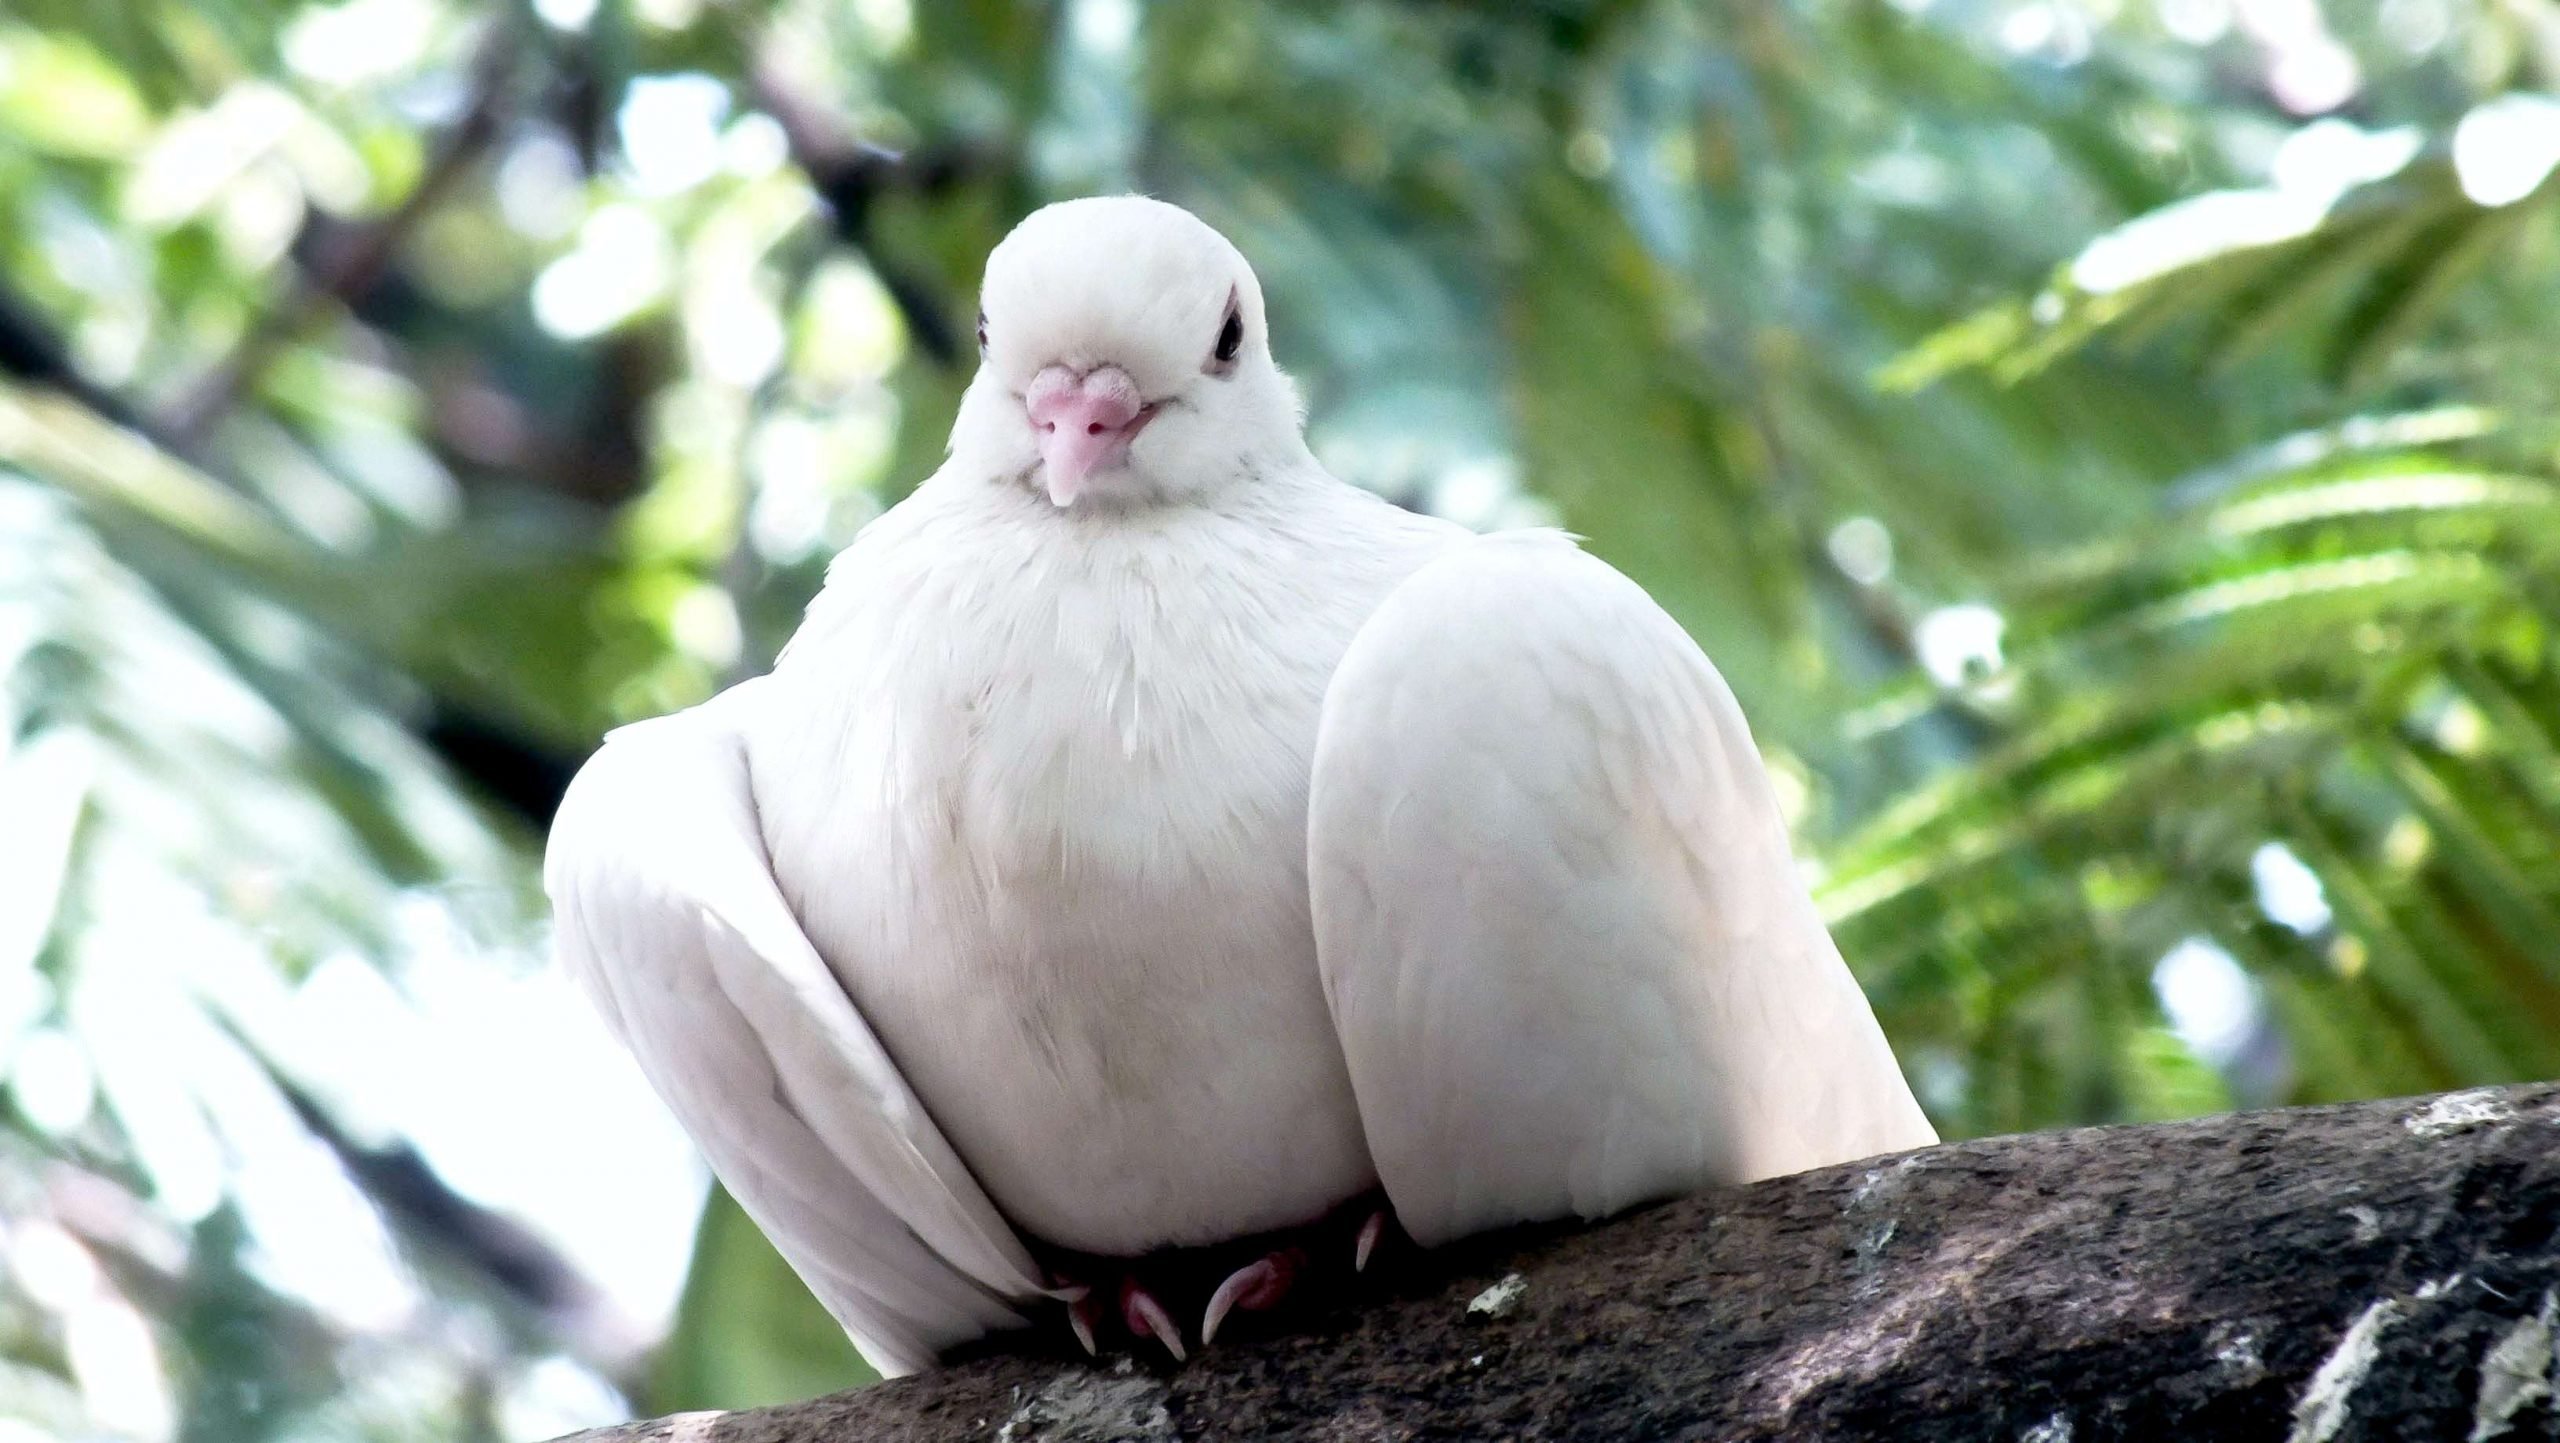 This is an angel disguised as a dove.